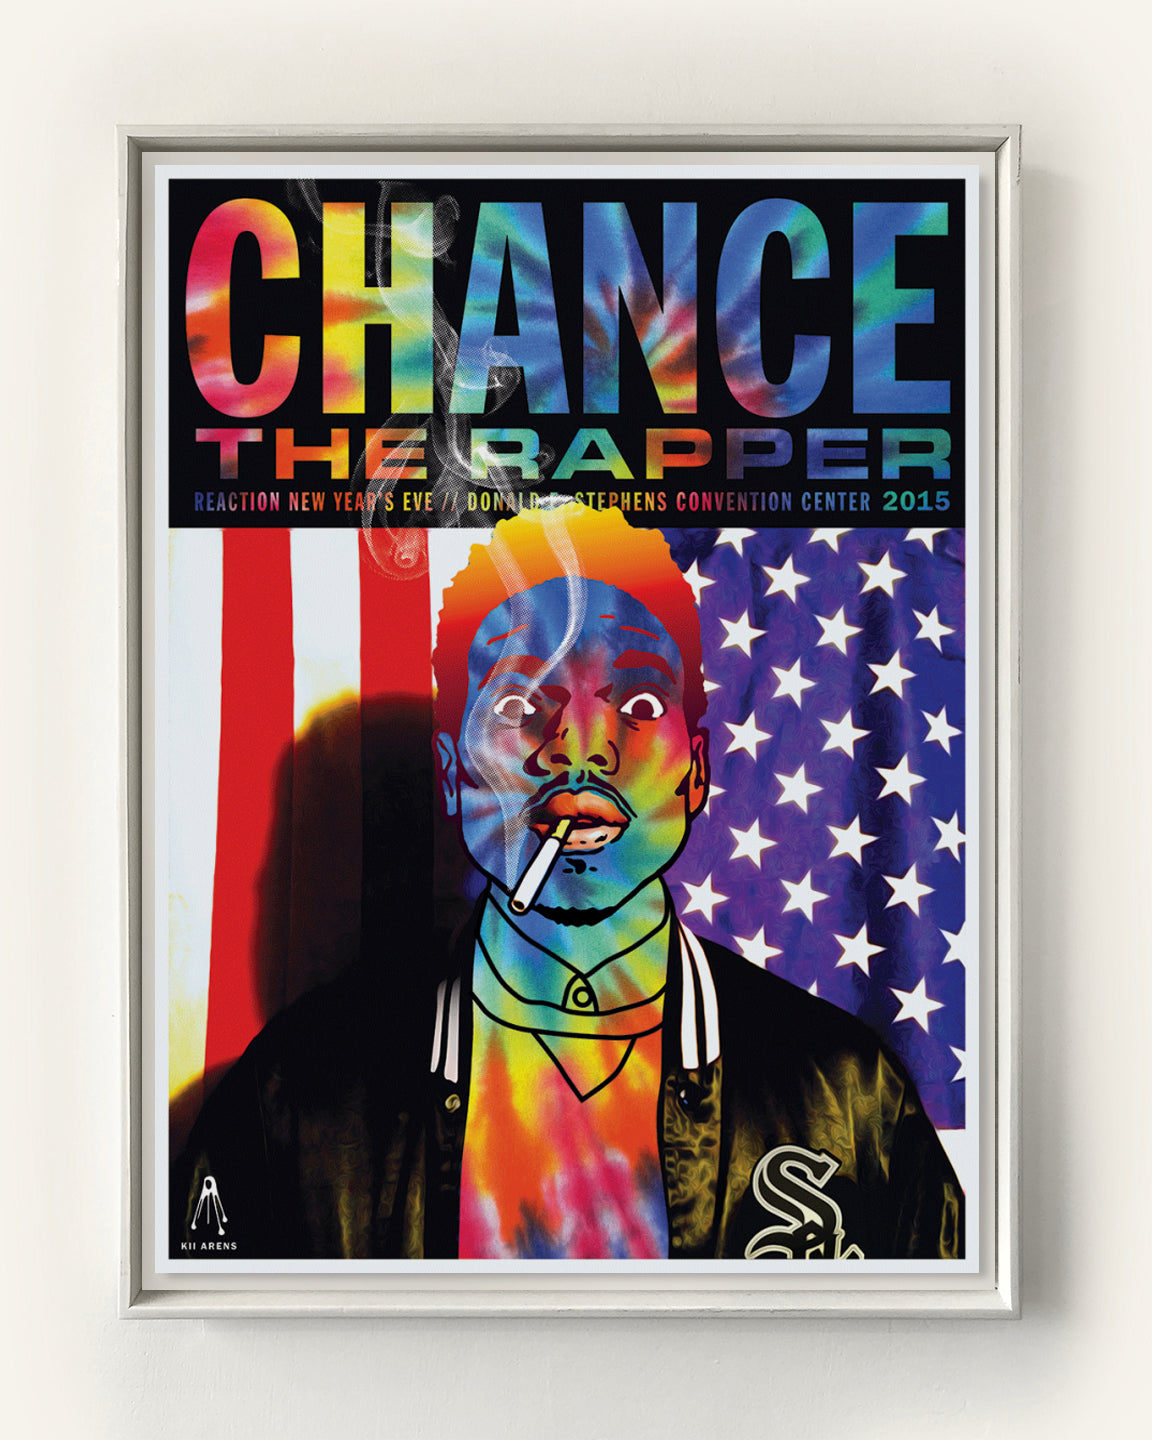 CHANCE THE RAPPER POSTER - DONALD STEPHENS CONVENTION CENTER